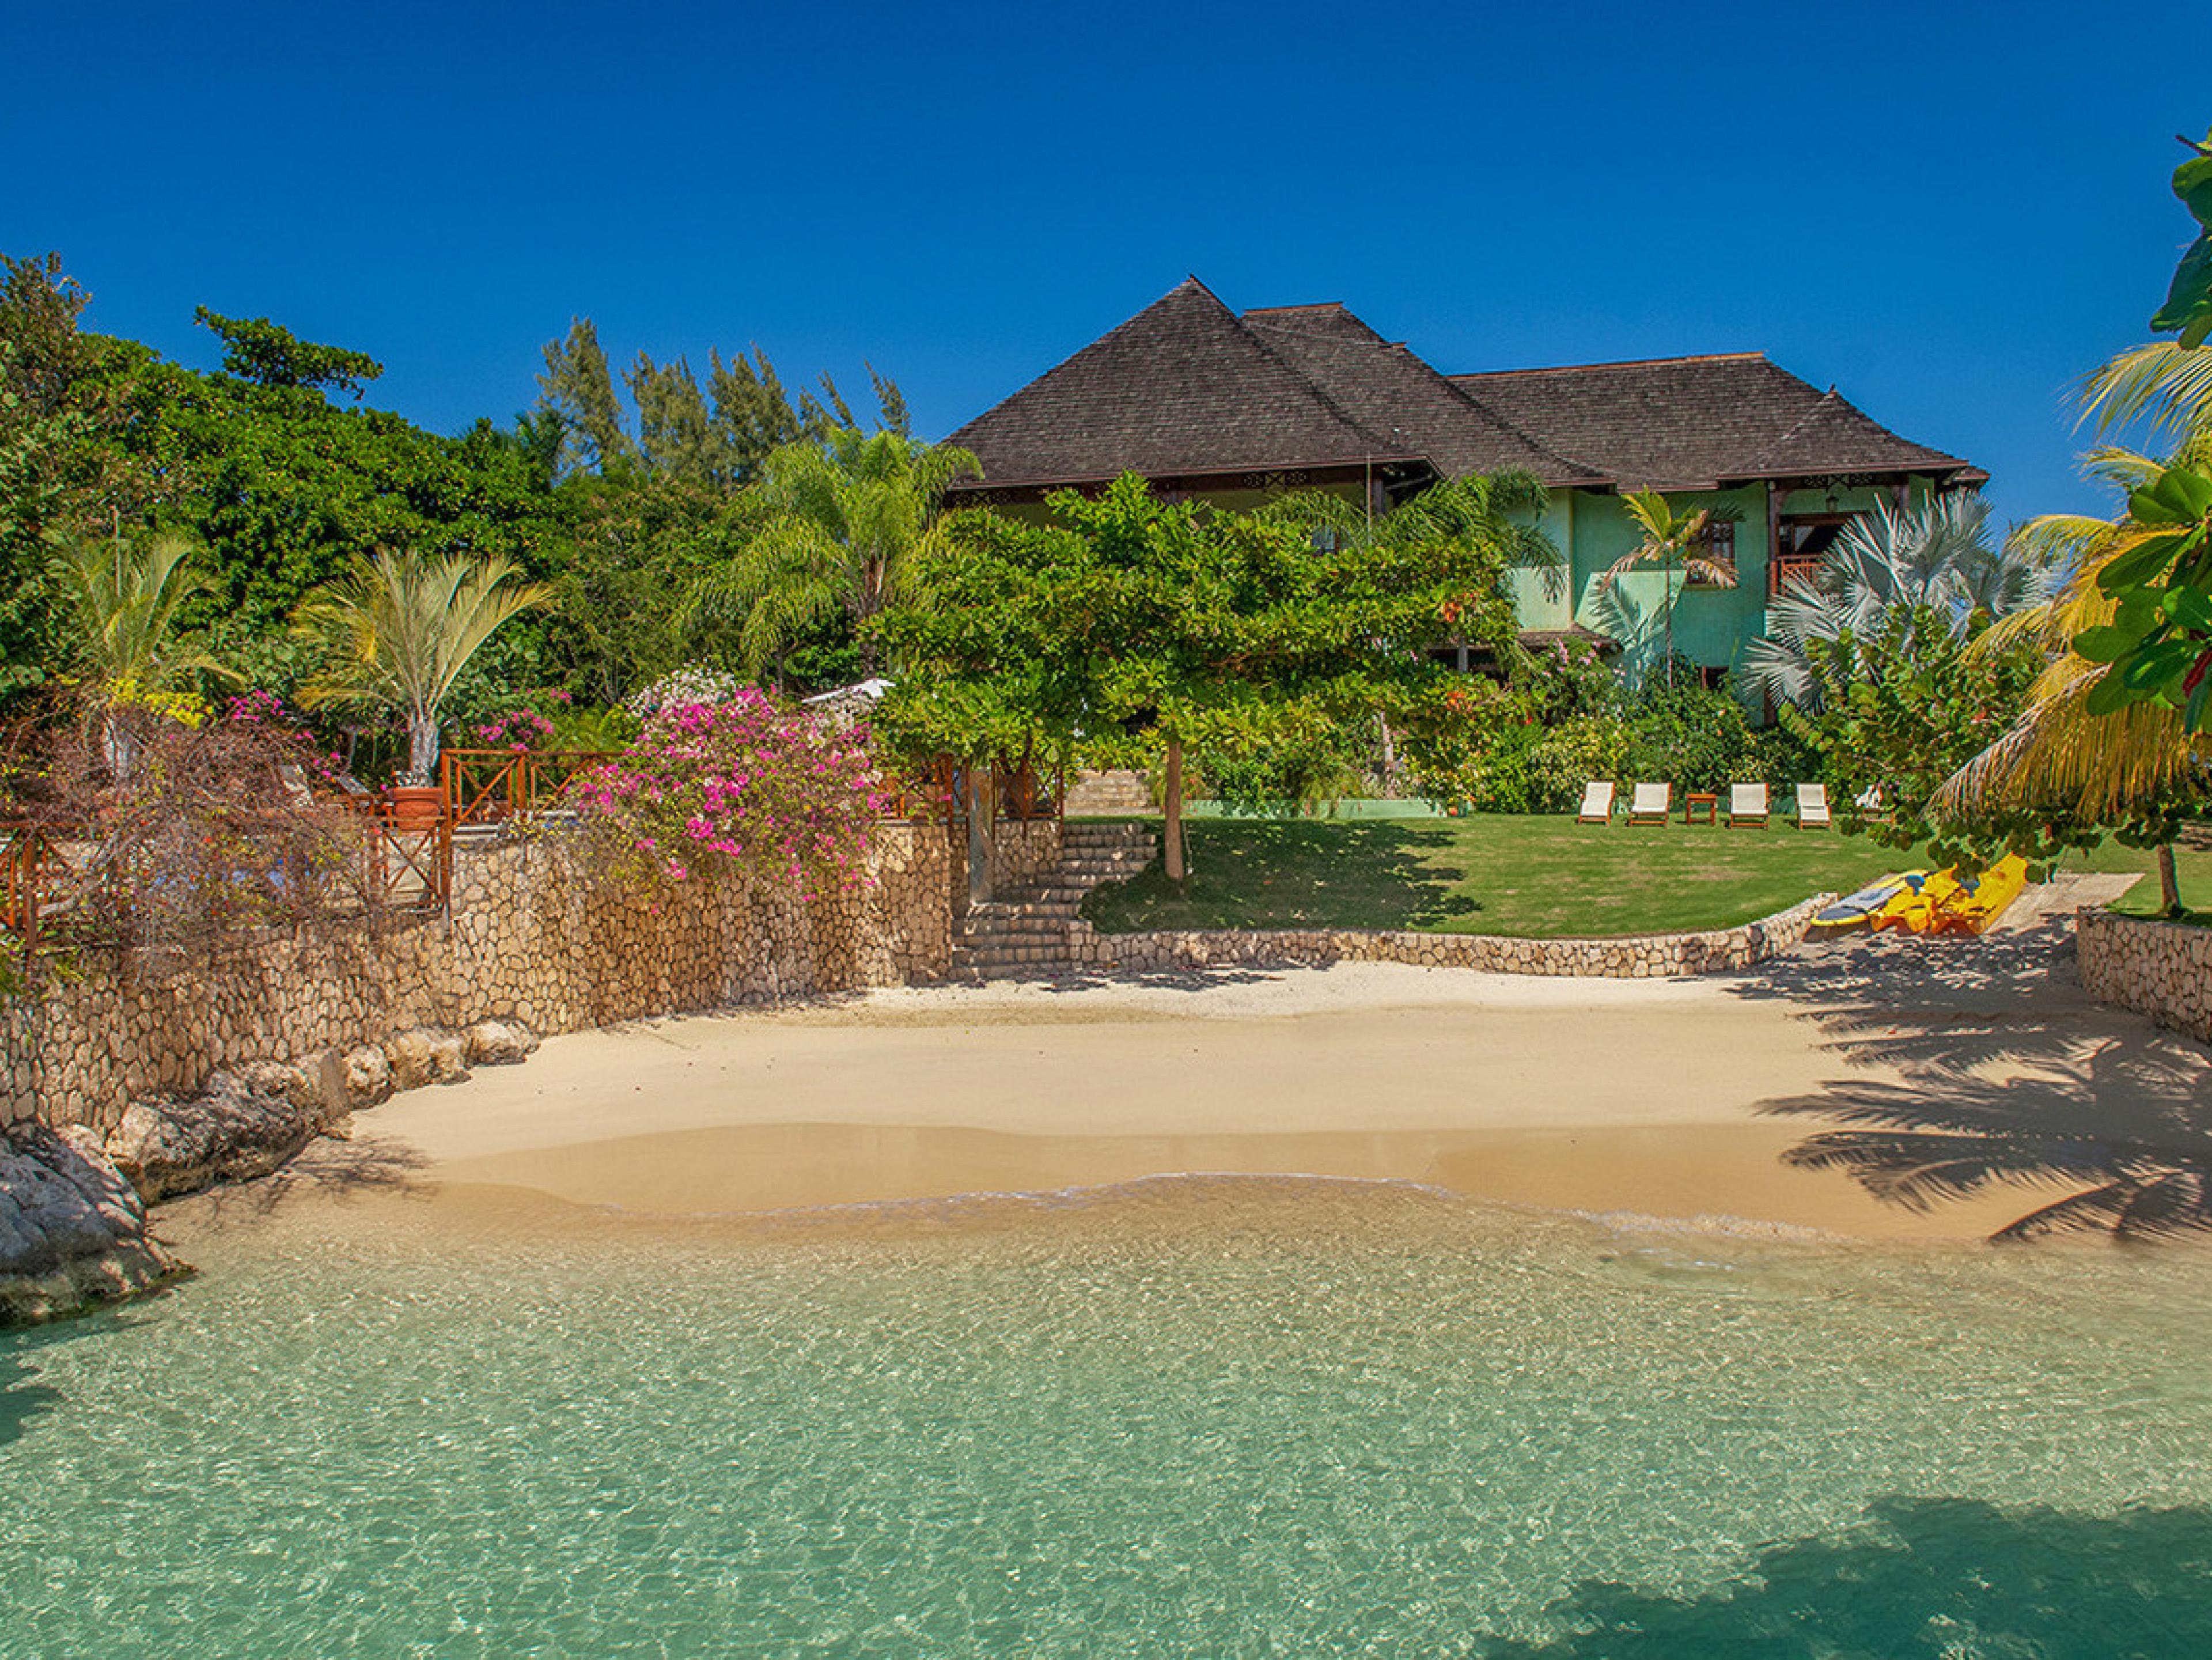 Whispering Waters on the Beach beach villas in Jamaica